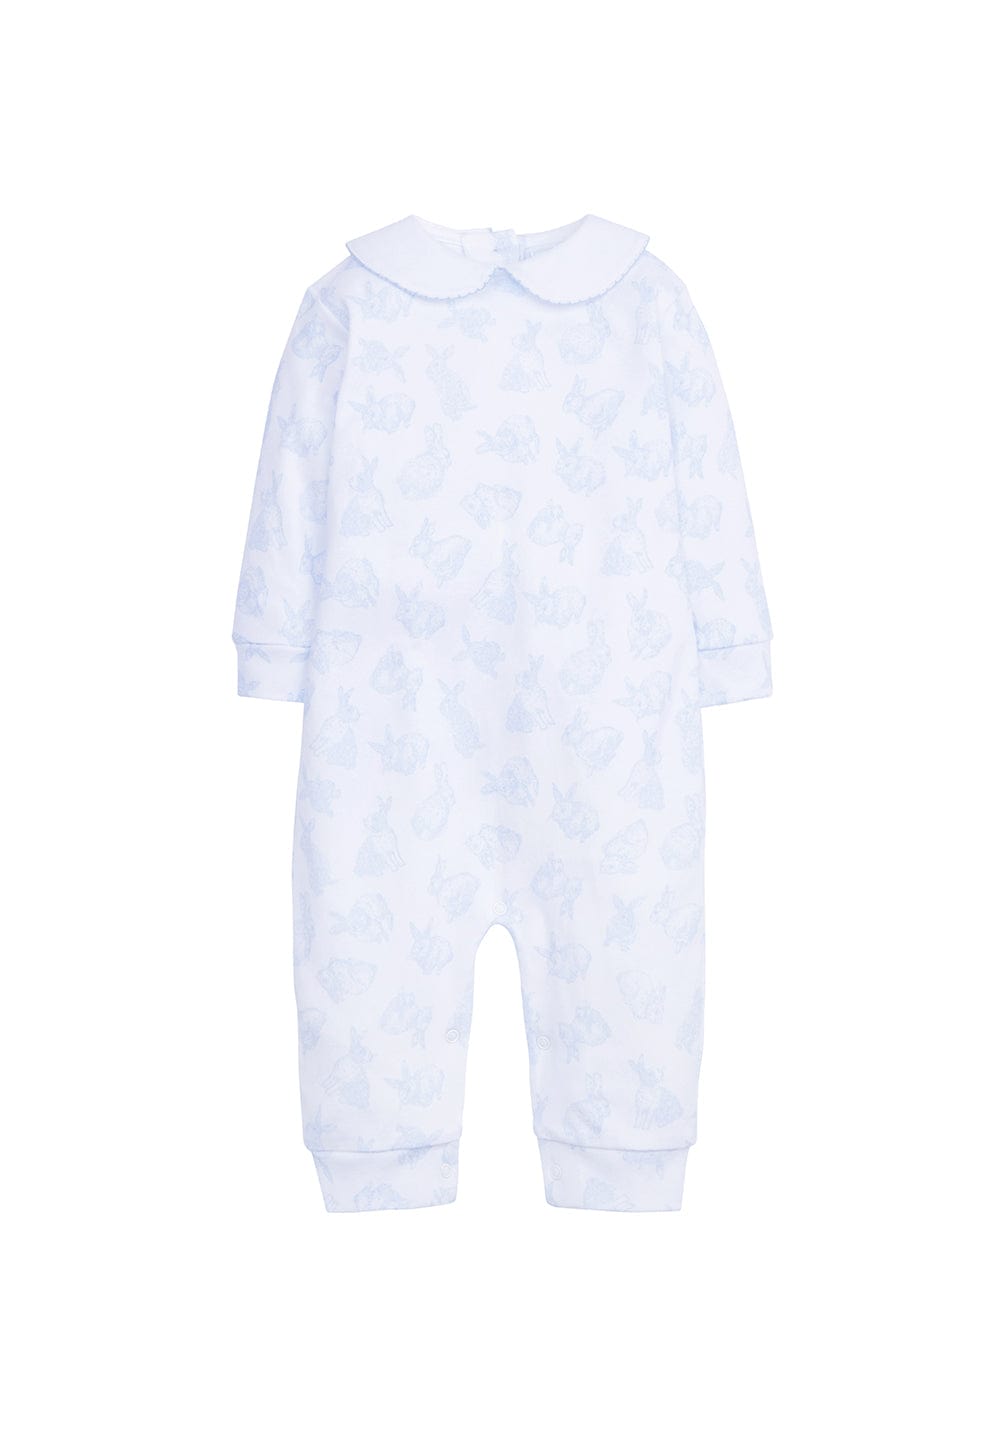 classic childrens clothing boys printed playsuit with peter pan collar and light blue bunny print